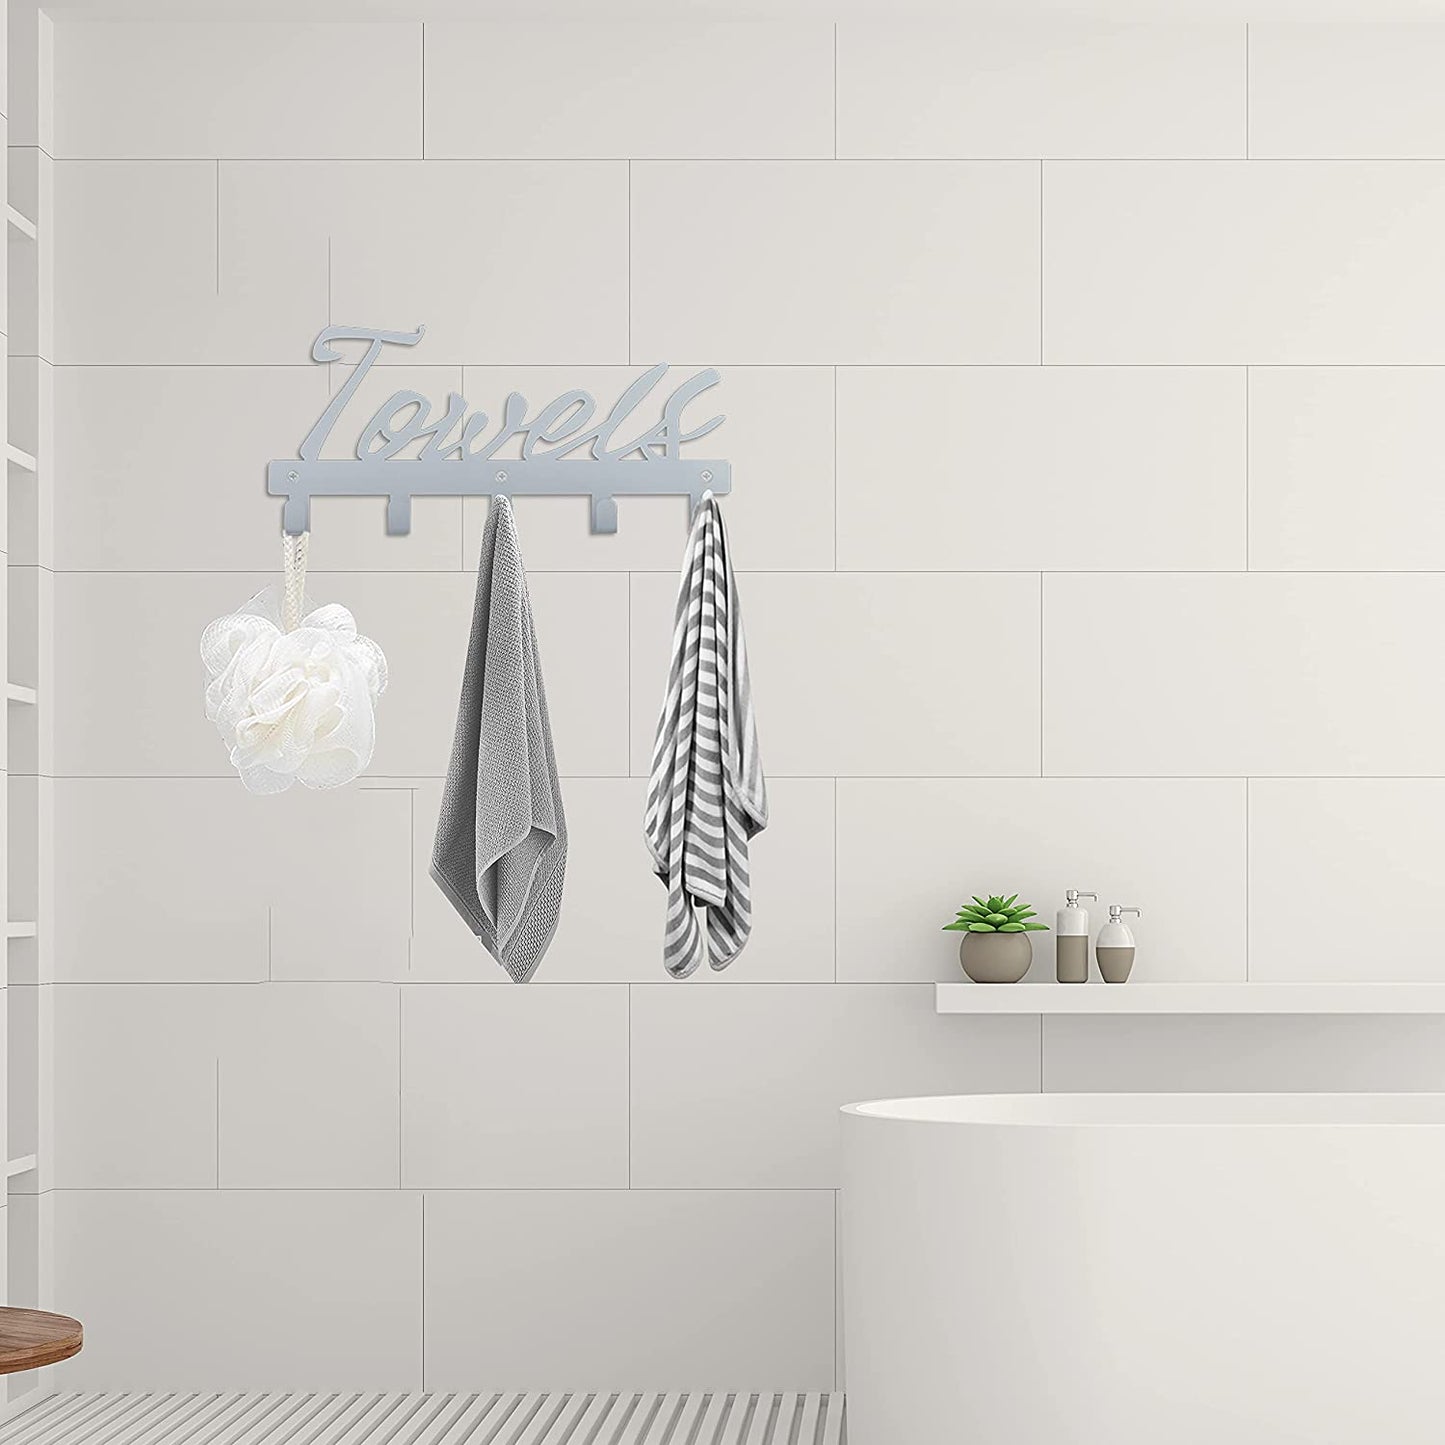 Bath Towel Rack for Wall Hooks -Organize and Easy to Install Towel Holder - Modern Bathroom Decor Storage for Robe Hand Towel Wash Clothes (Silver Grey)